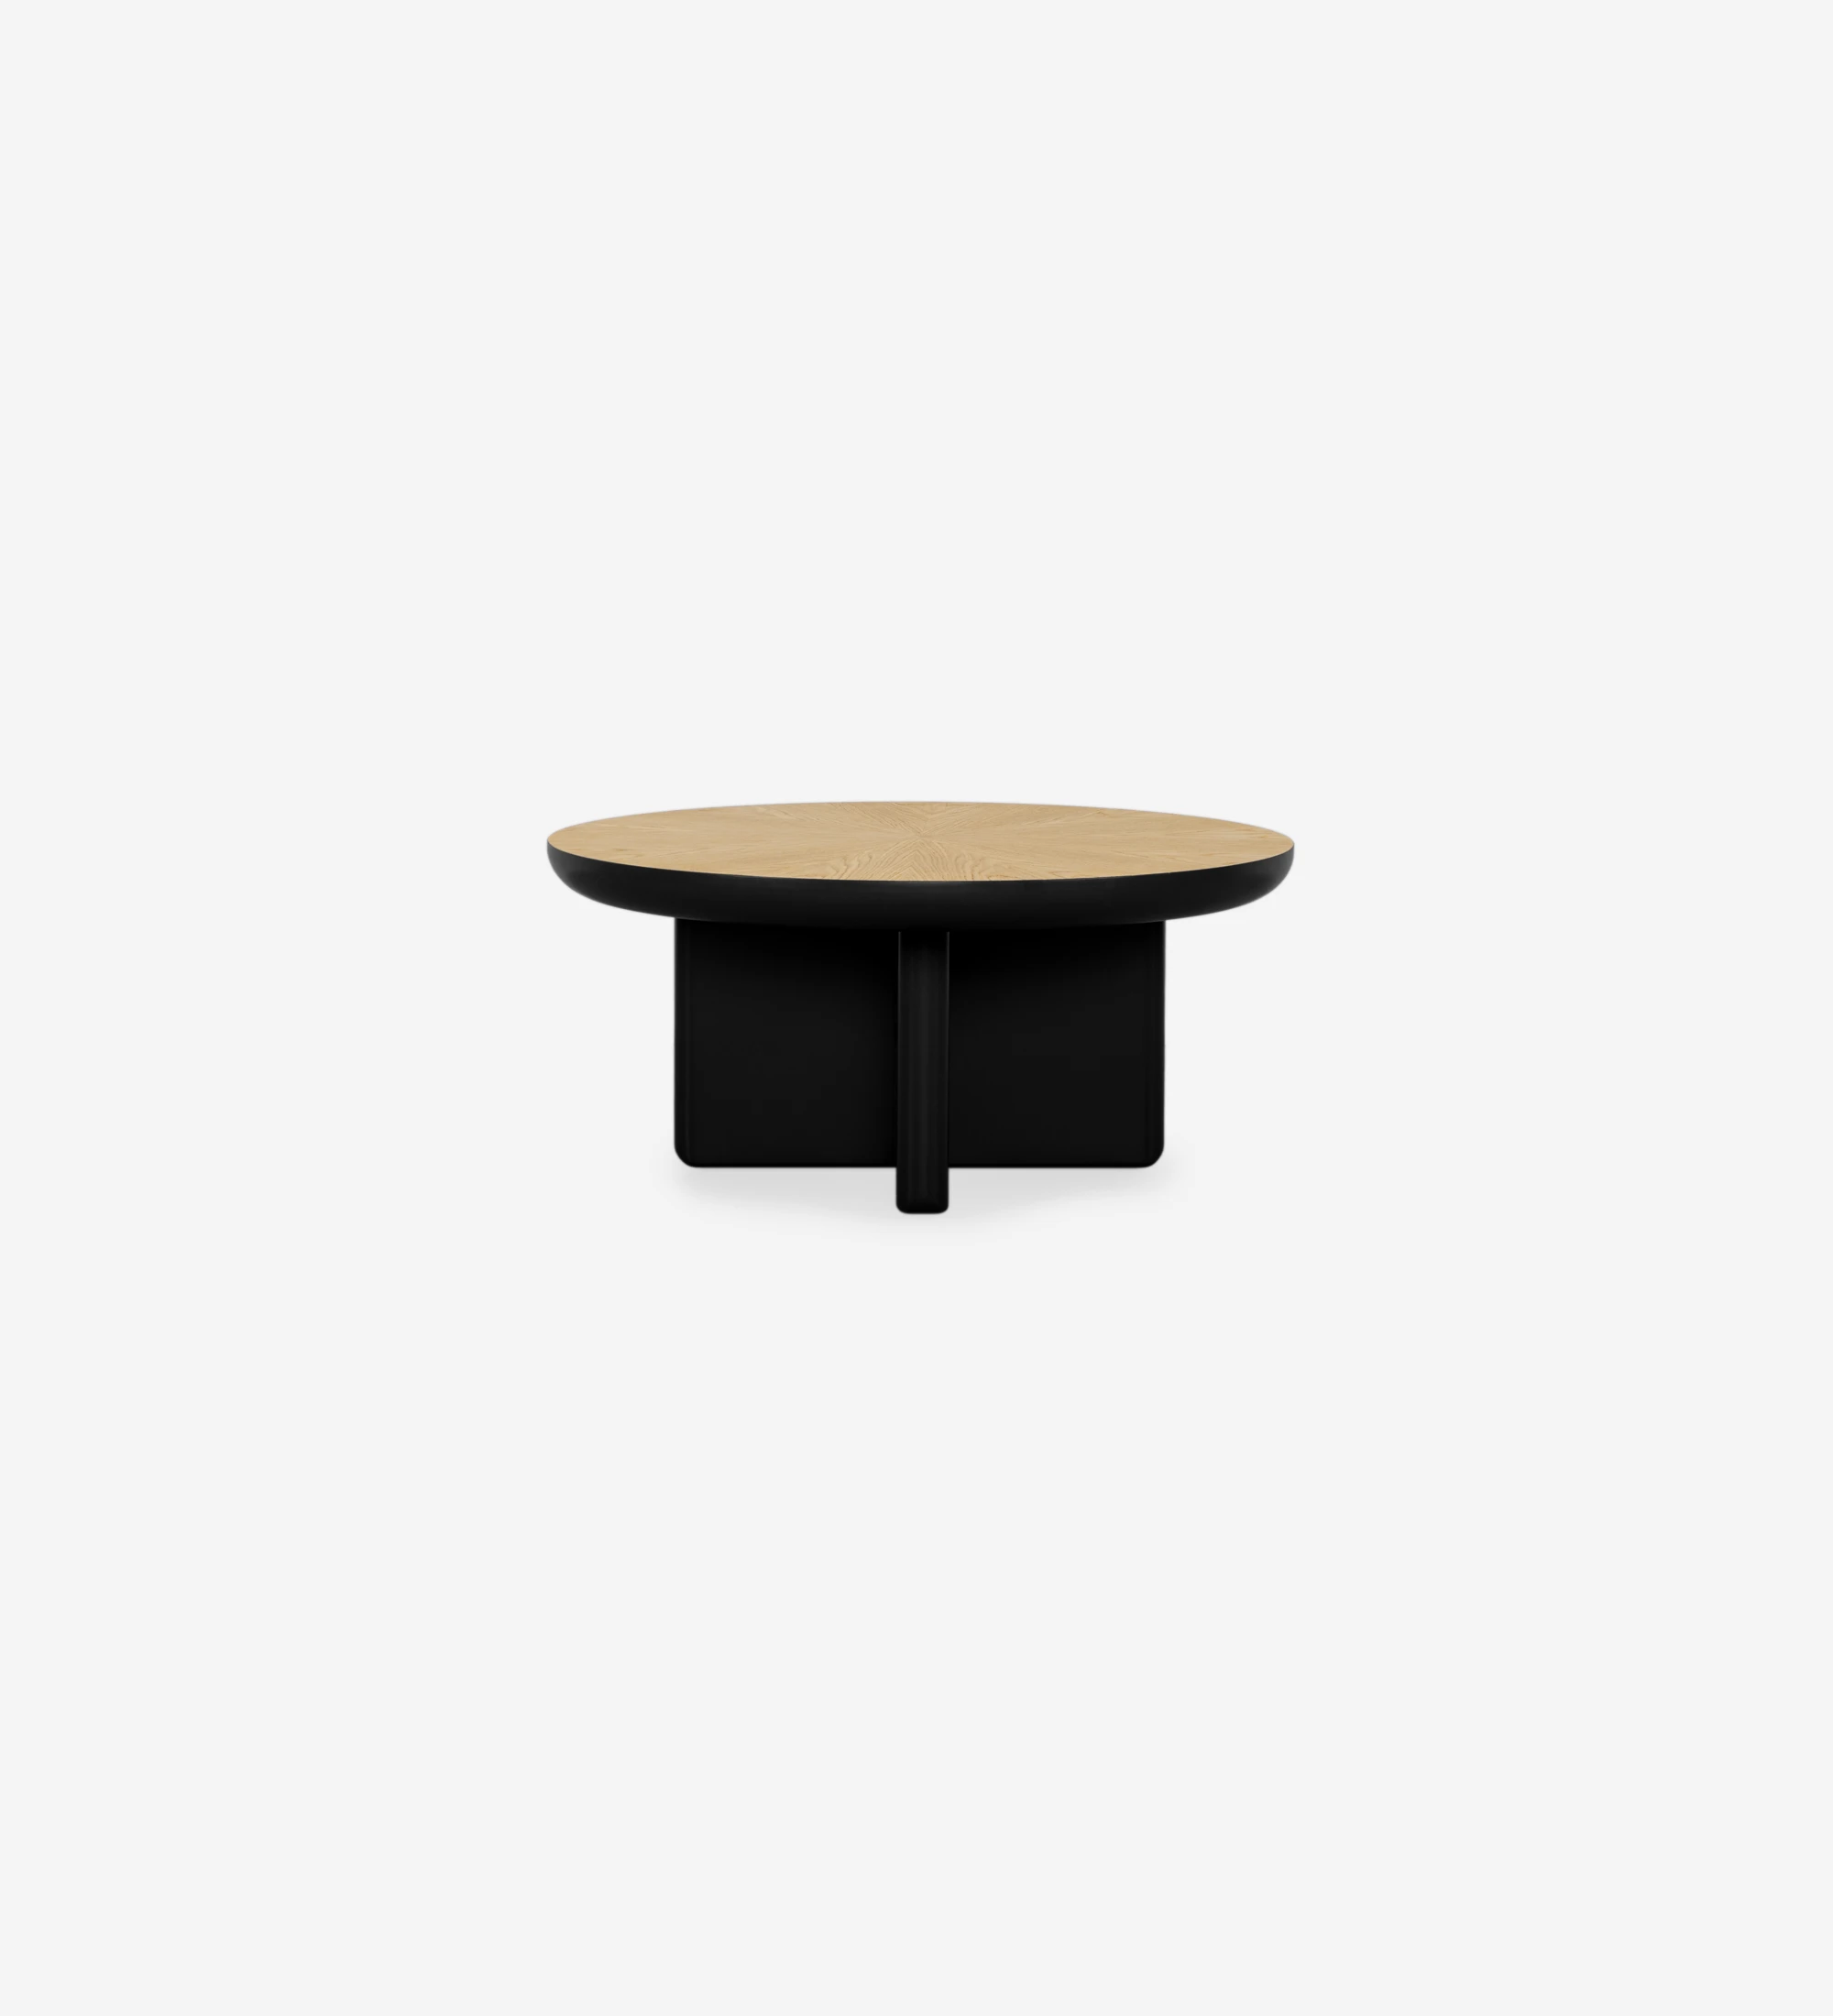 Mónaco round center table in black lacquer with natural oak veneer top, Ø 75 cm.